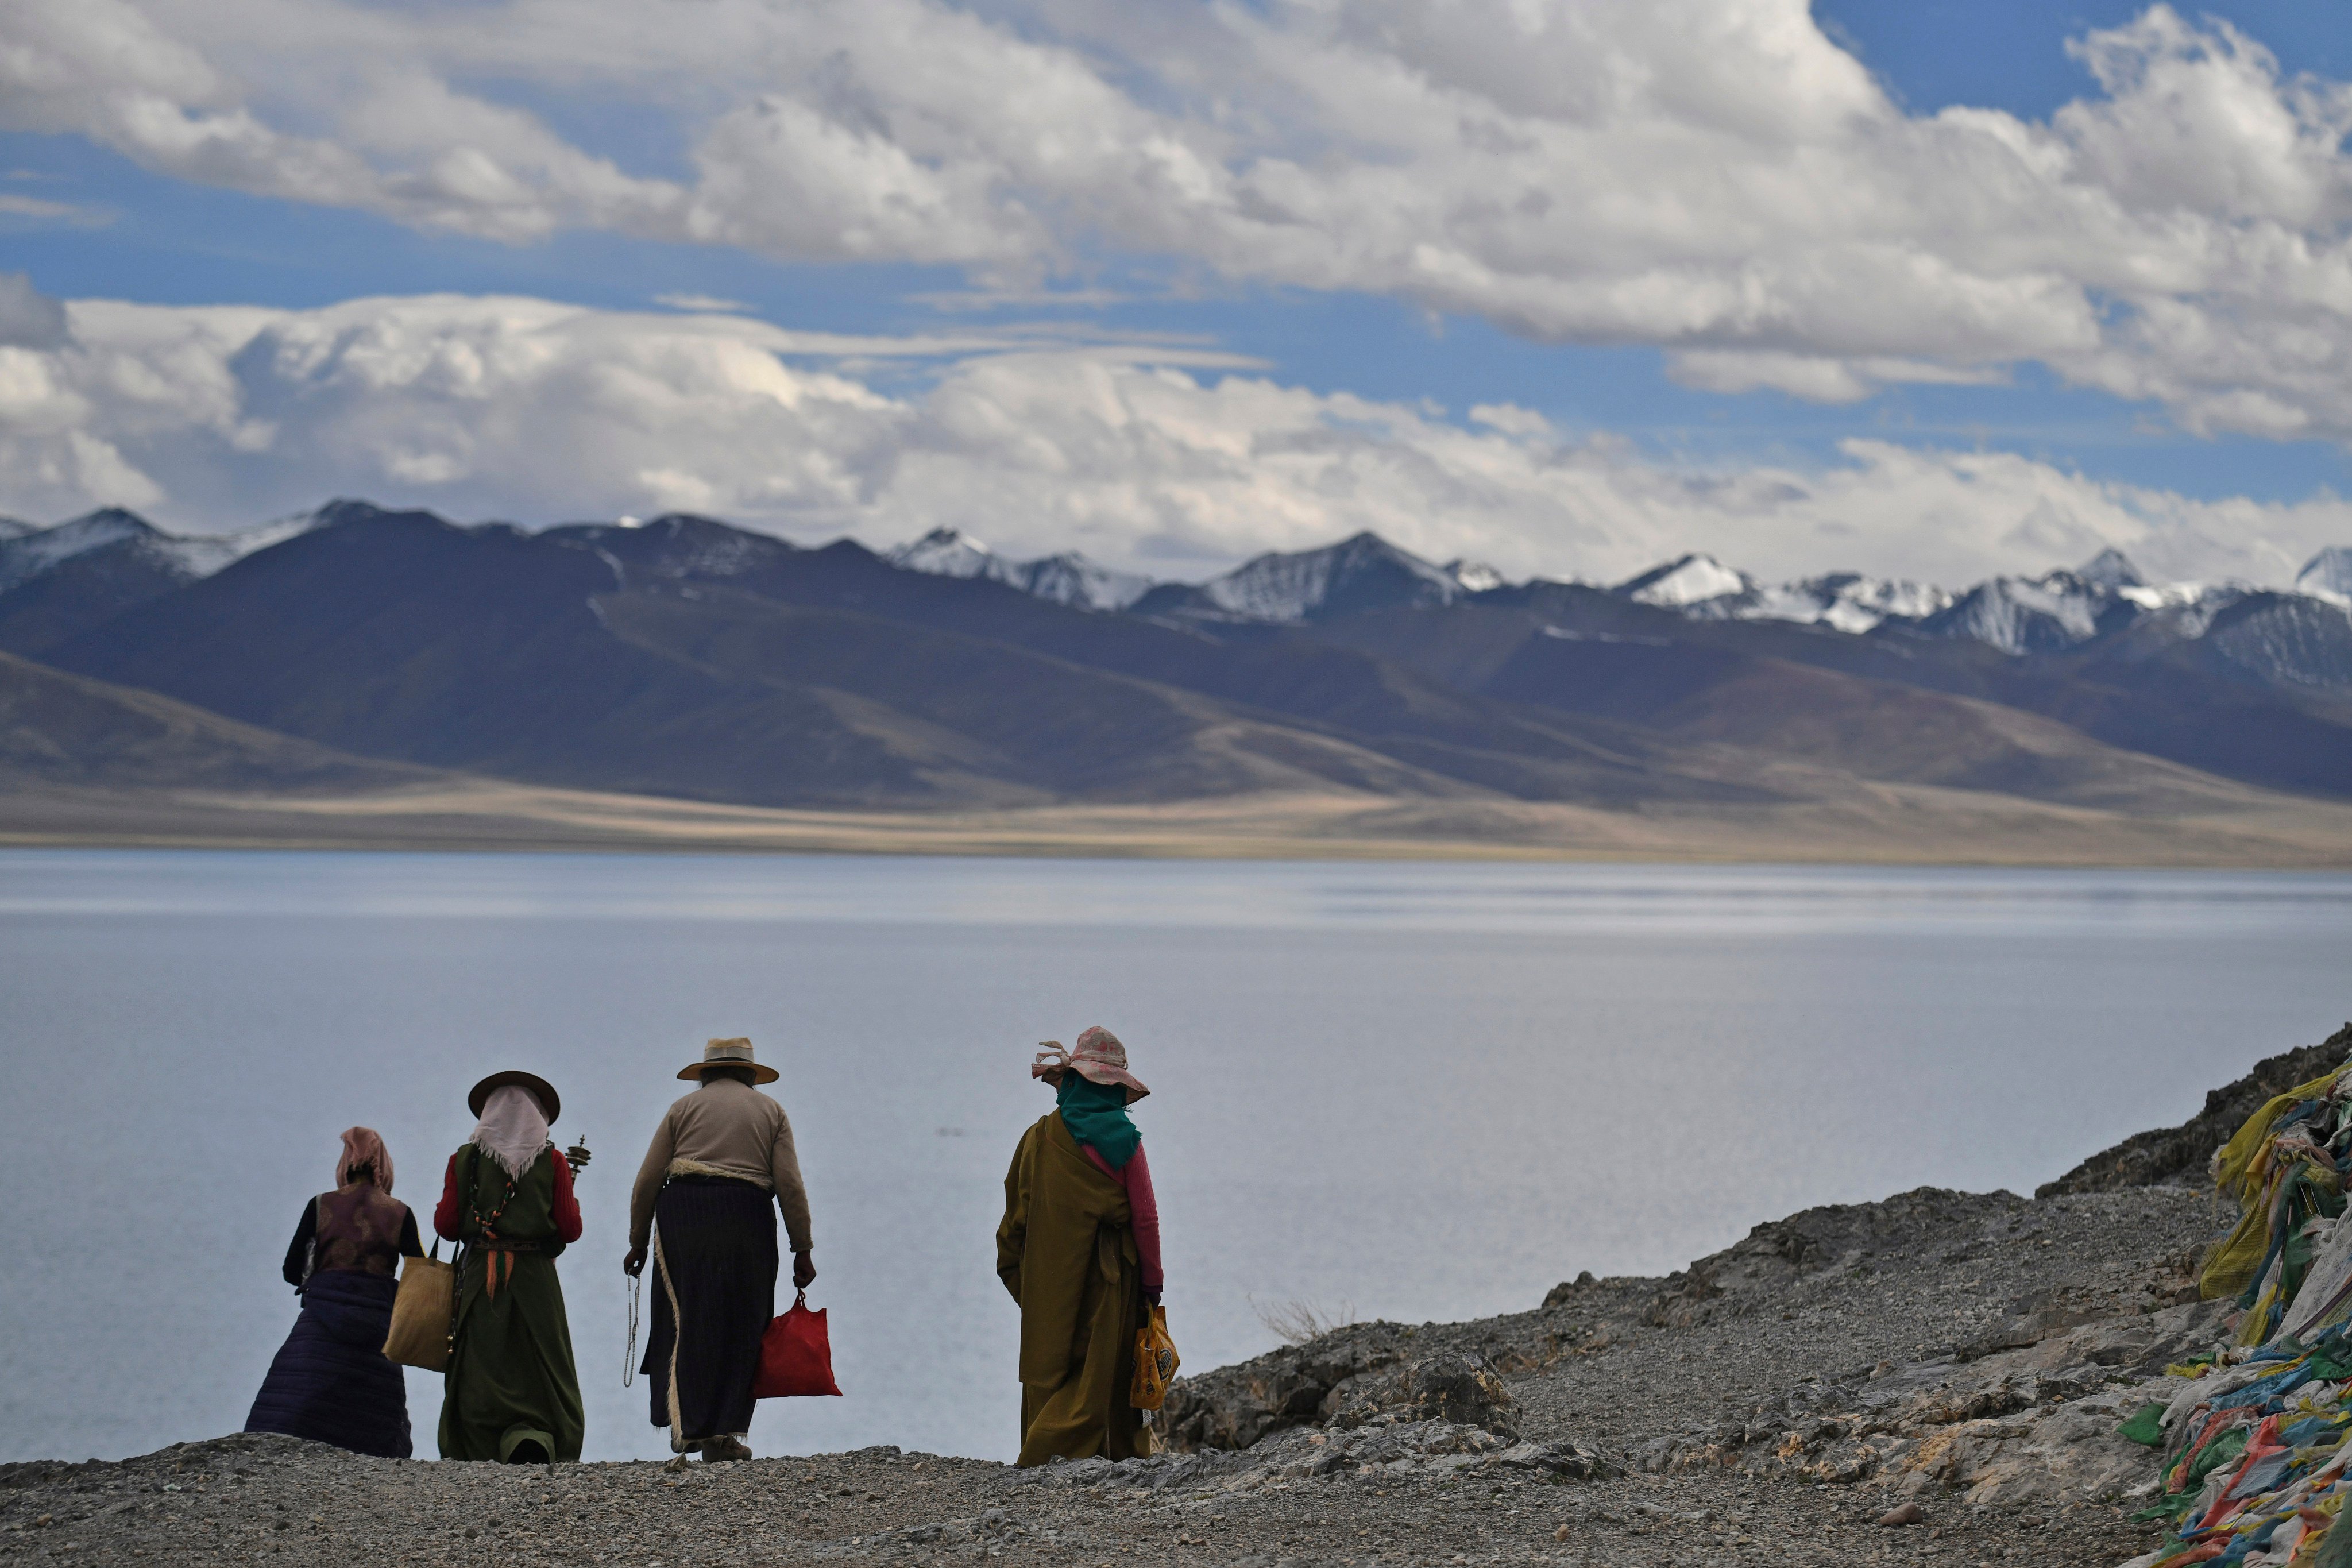 The Tibet autonomous region is increasingly being referred to as ‘Xizang’ by Chinese state media following the term being used in a State Council white paper in November. Photo: Getty Images